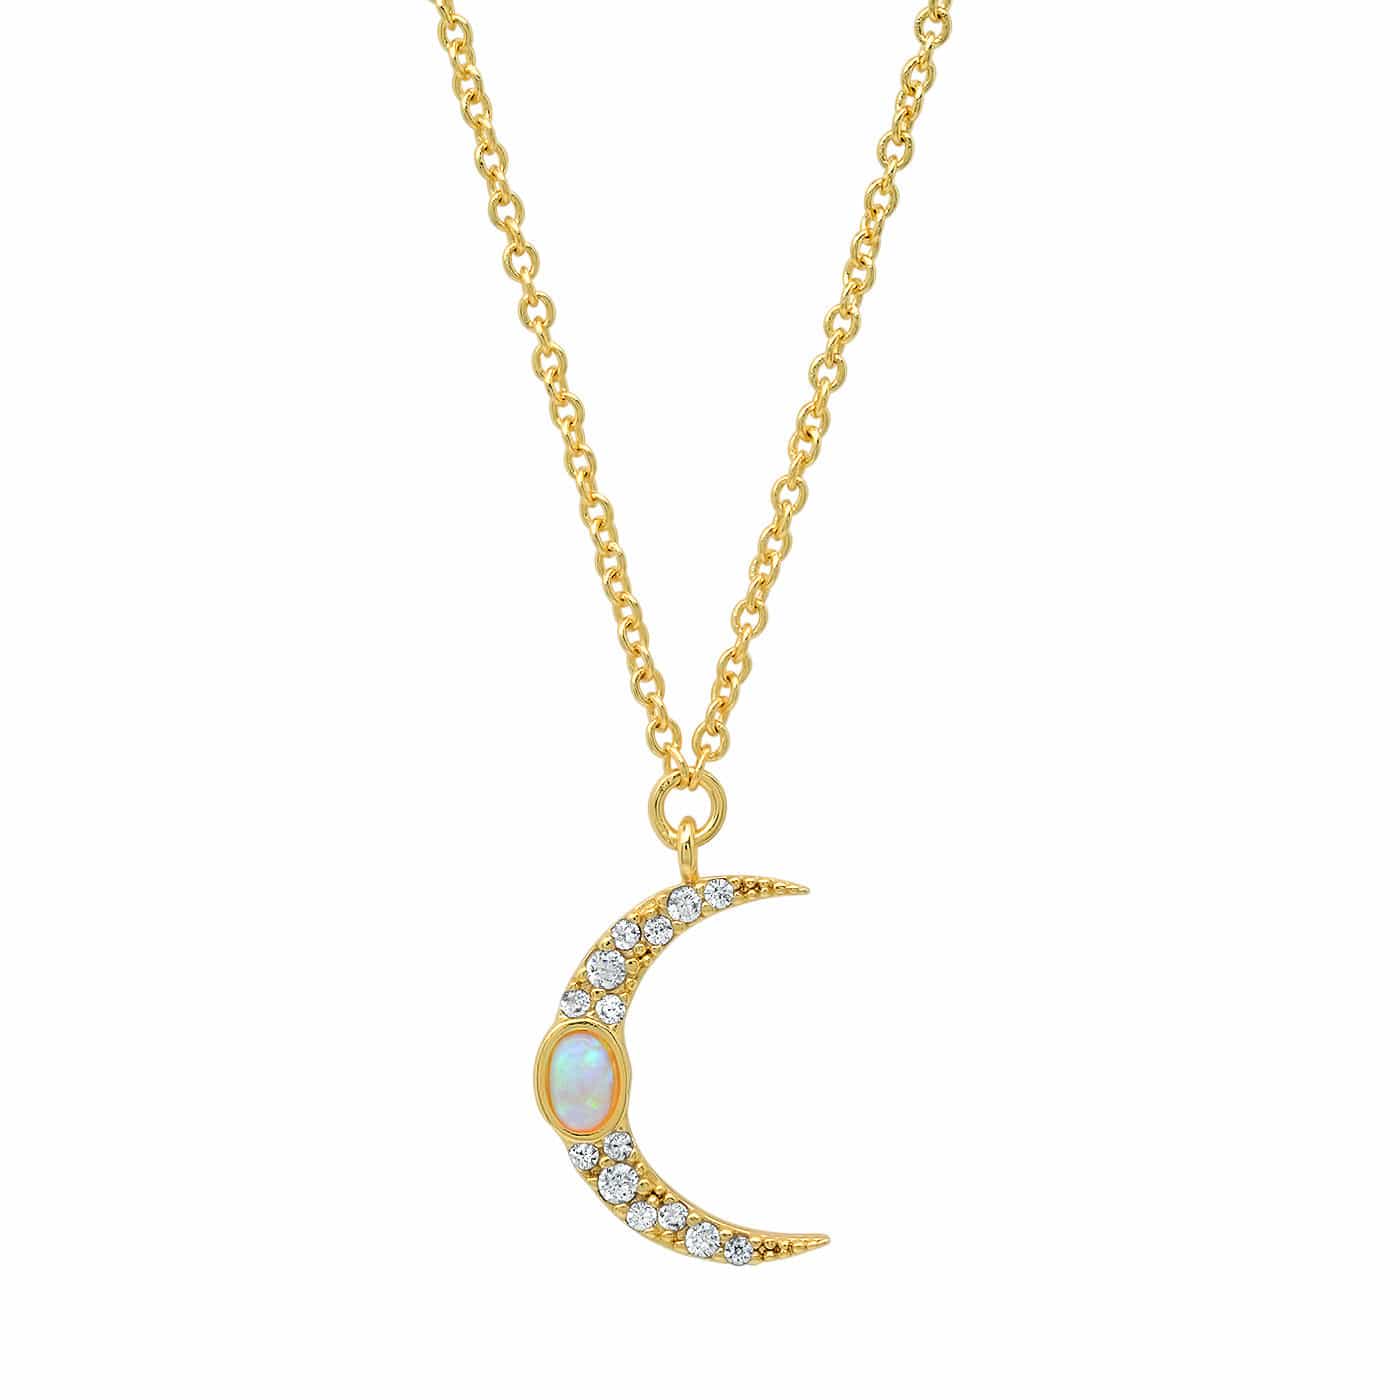 TAI JEWELRY Necklace Pave Moon Pendant With Opal Accent